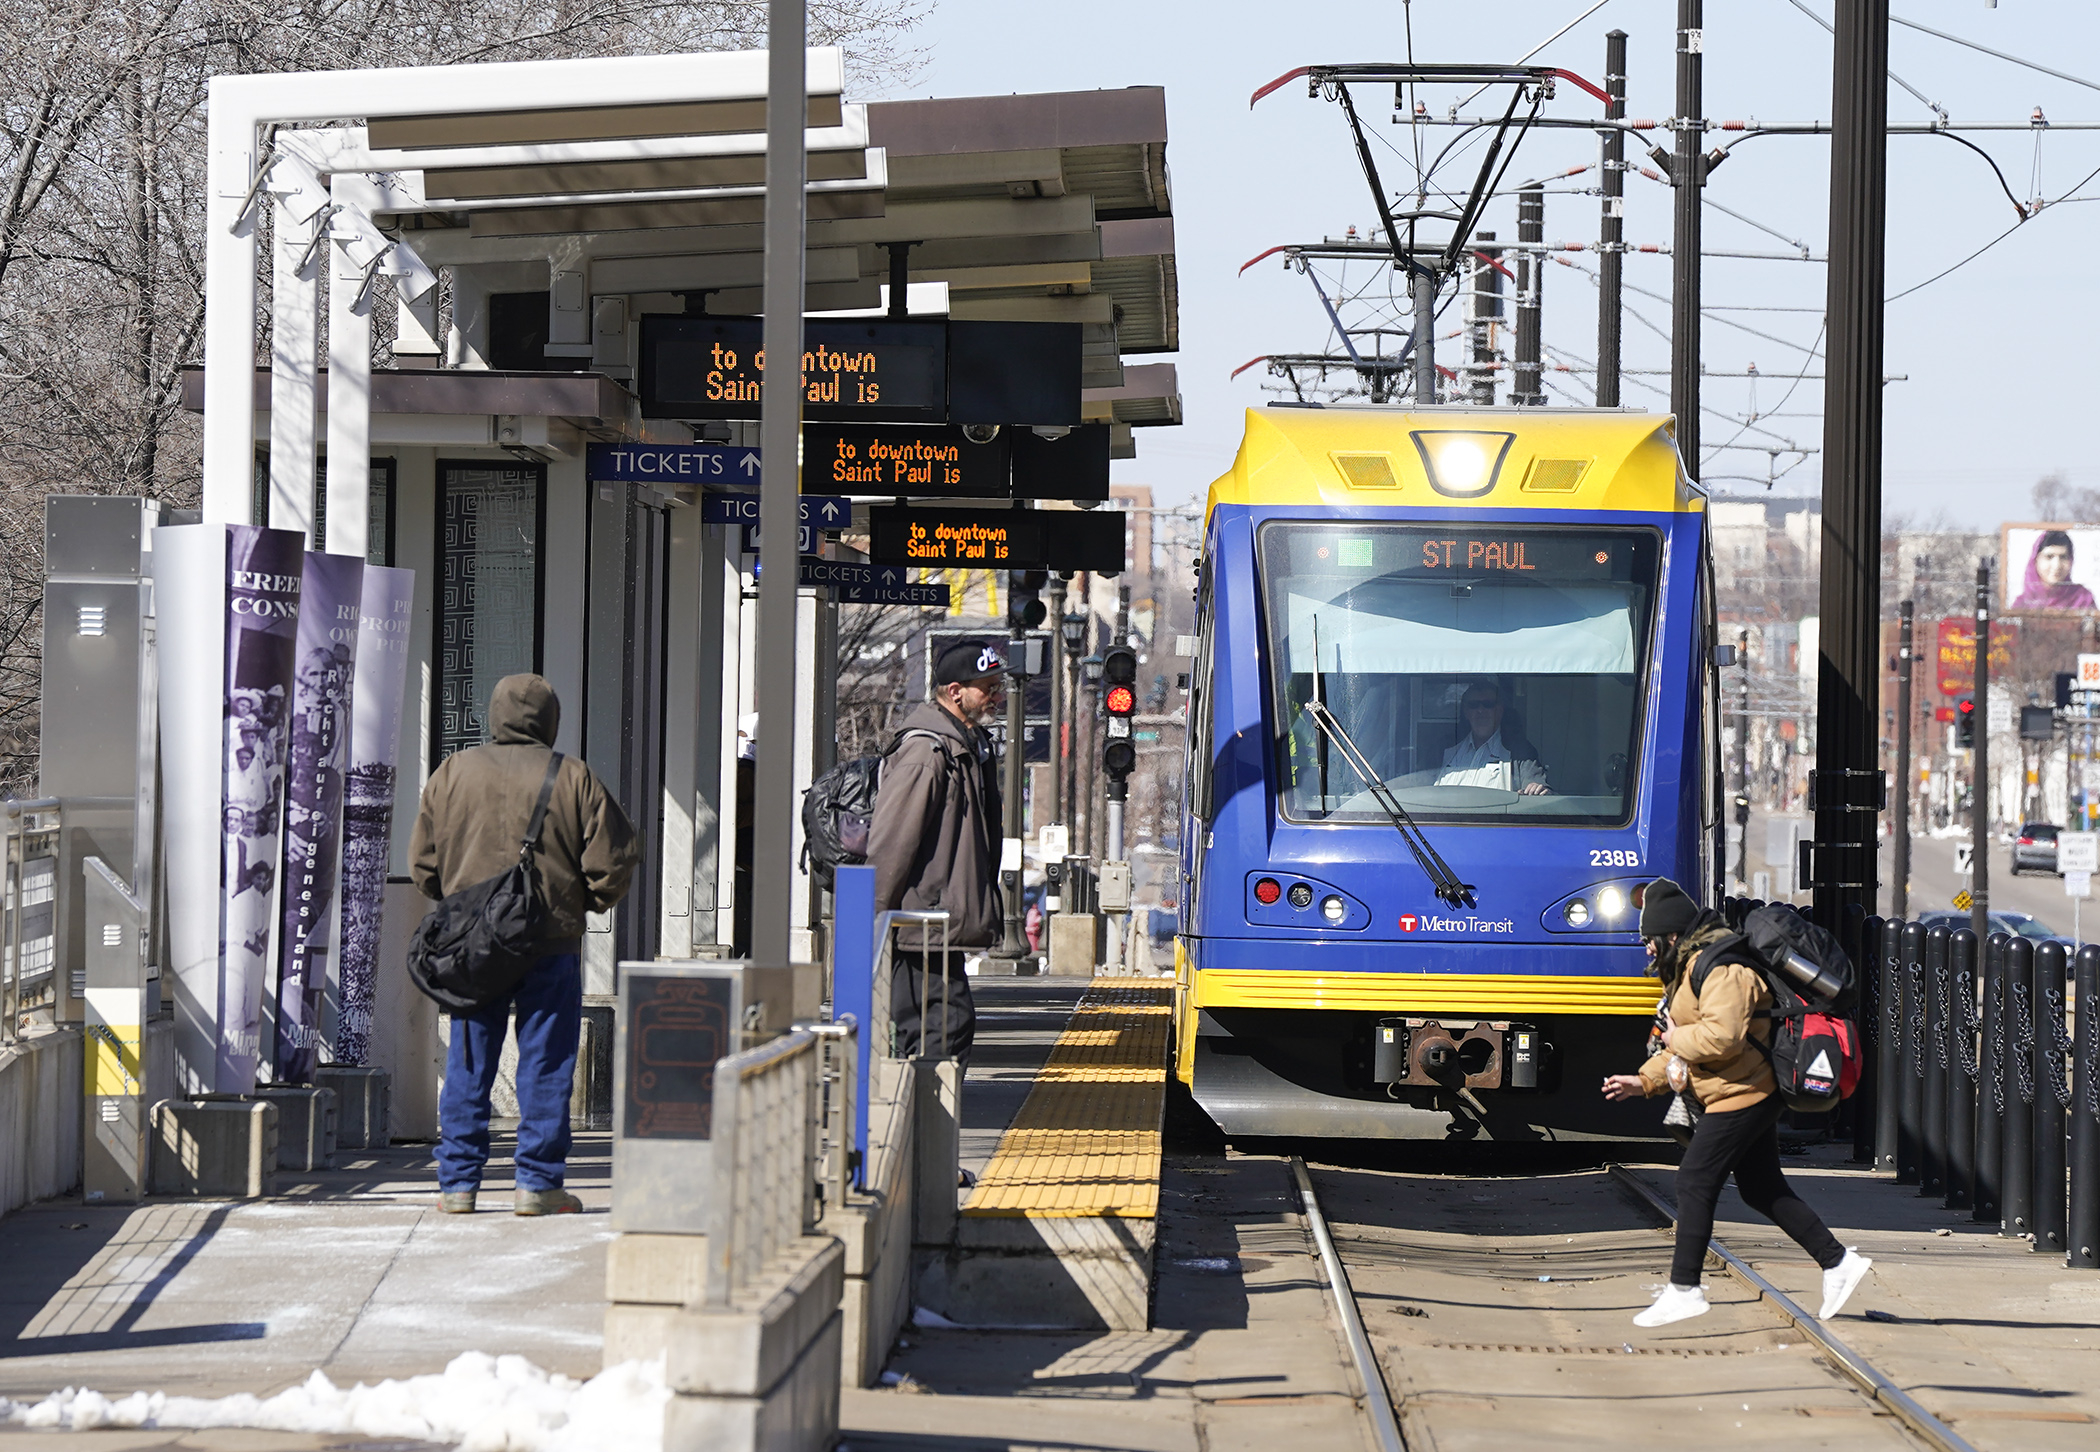 HF2045 would appropriate $1 million for a short-term, immediate intervention program on the light rail transit system and, its sponsor says, aims to promote a better rider experience. (House Photography file photo)